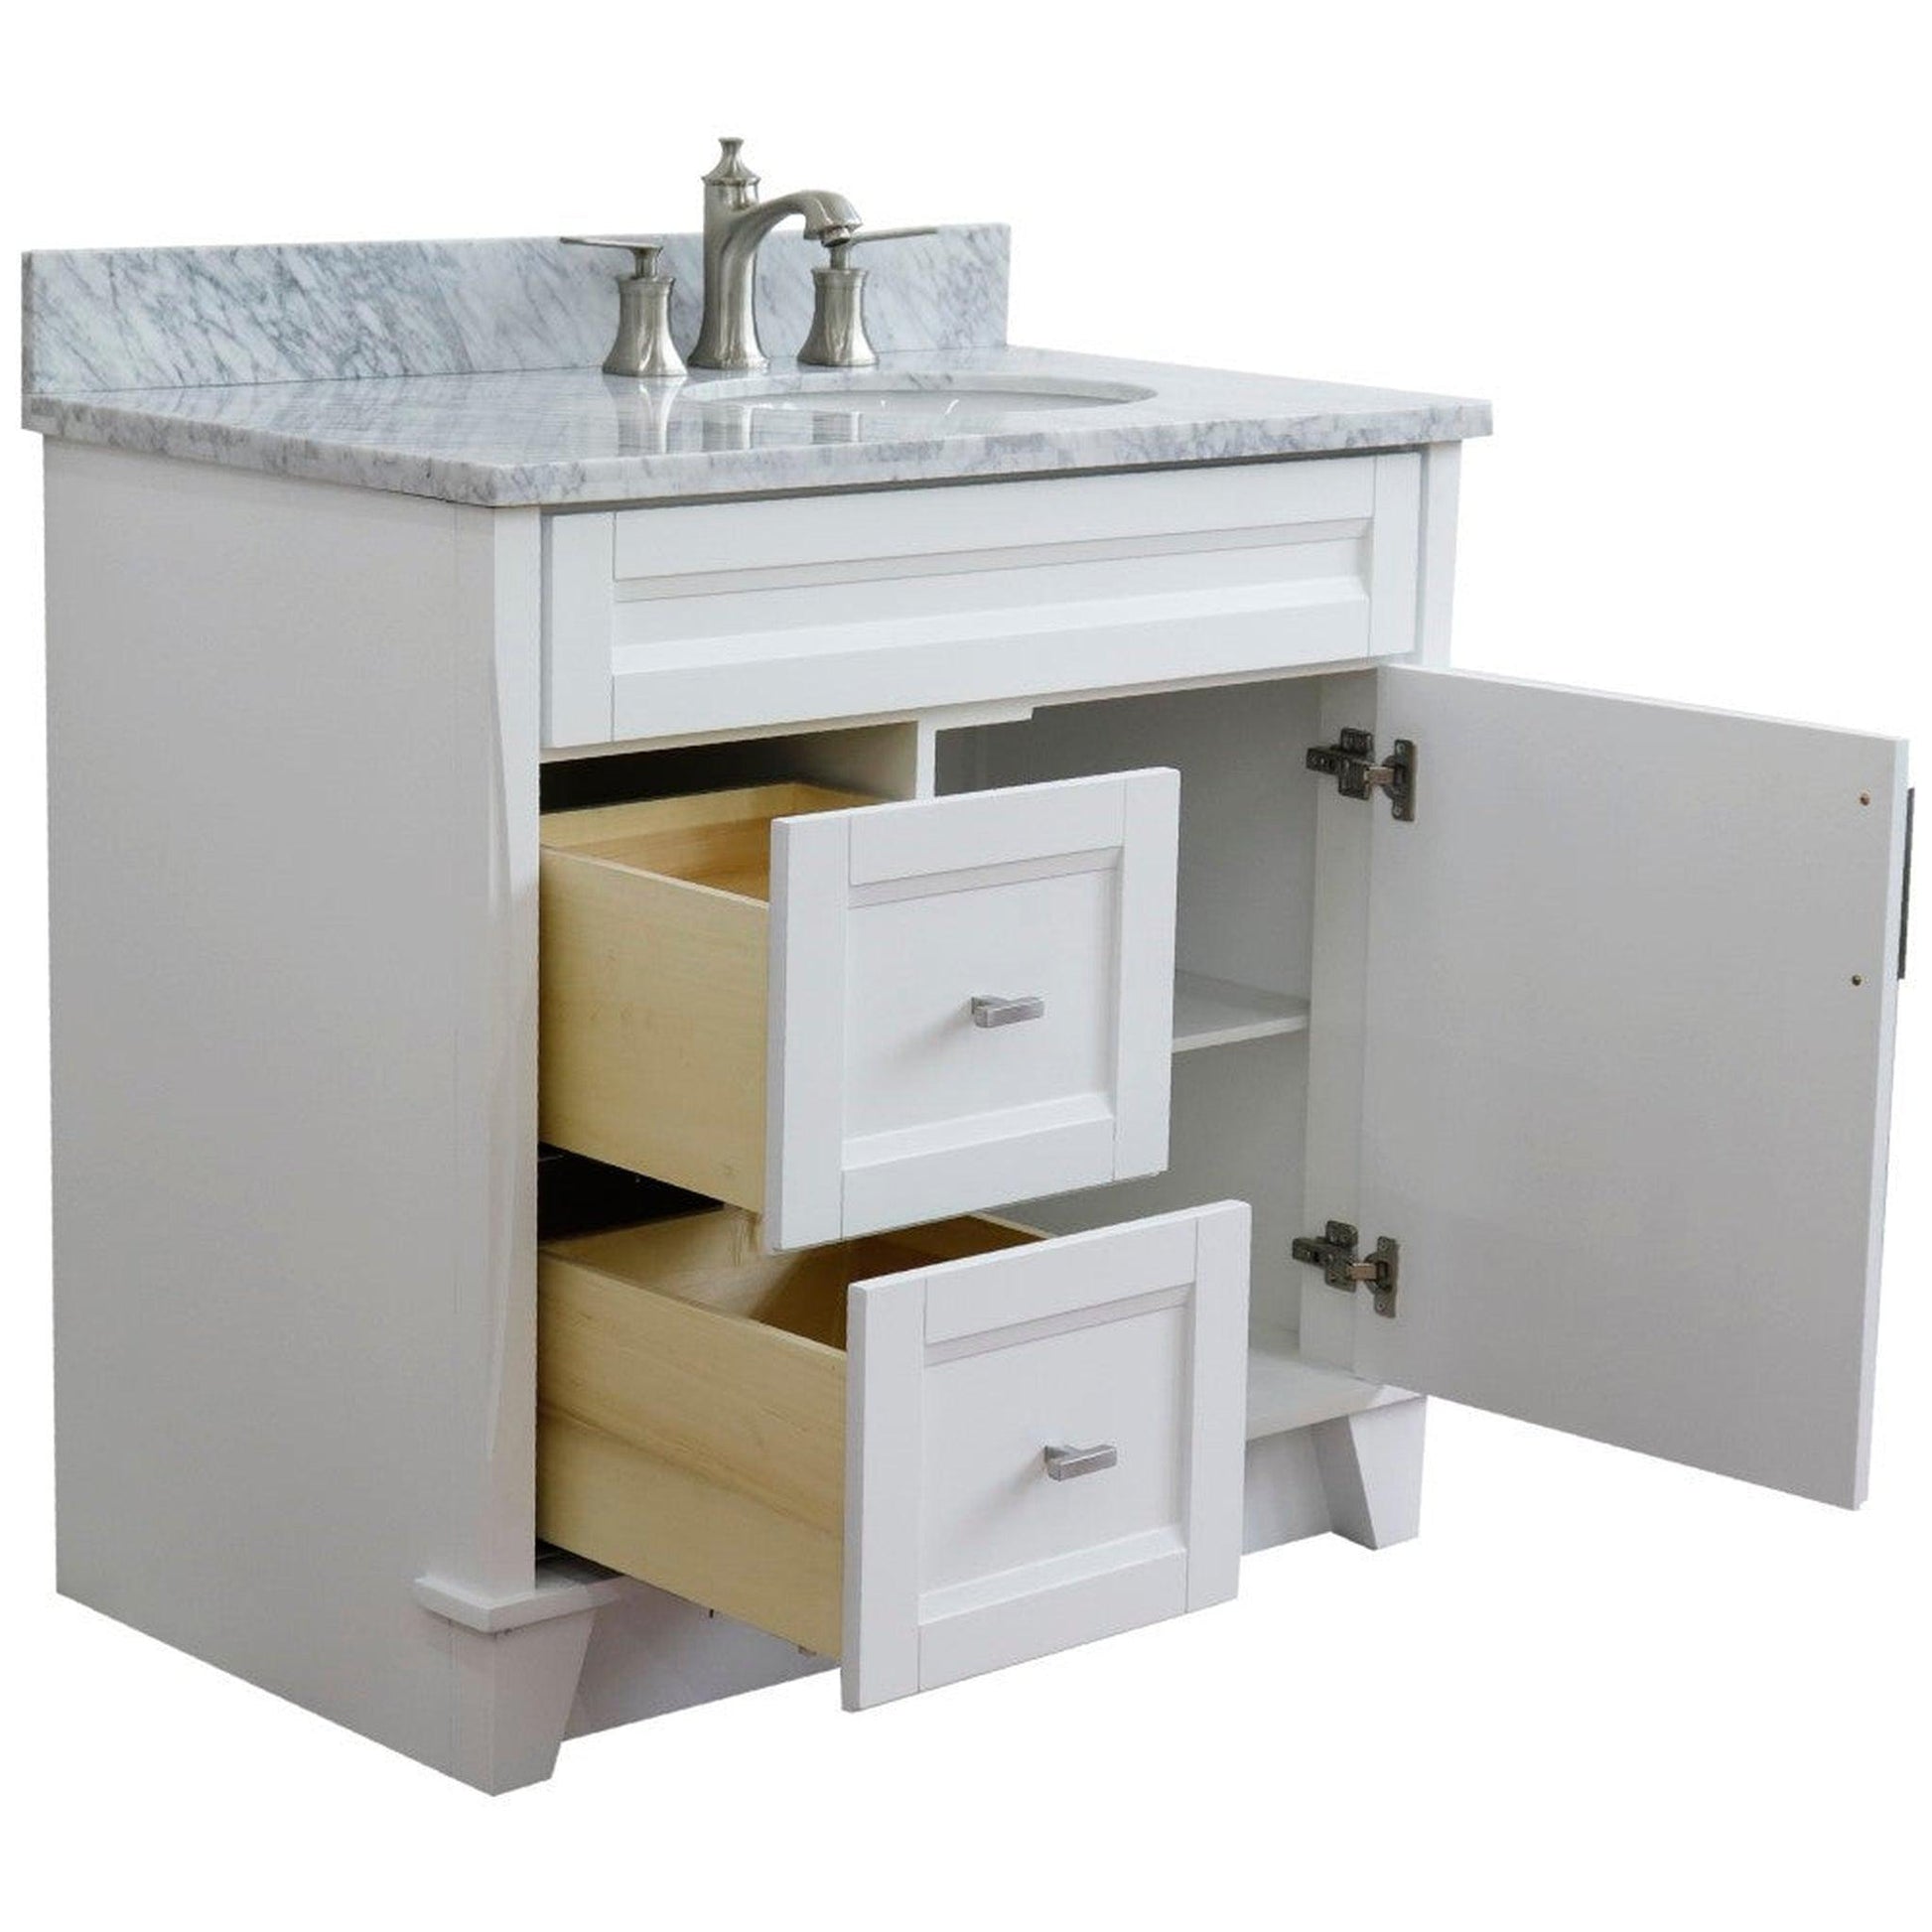 Bellaterra Home Terni 37" 1-Door 2-Drawer White Freestanding Vanity Set With Ceramic Right Offset Undermount Oval Sink and White Carrara Marble Top, and Right Door Base